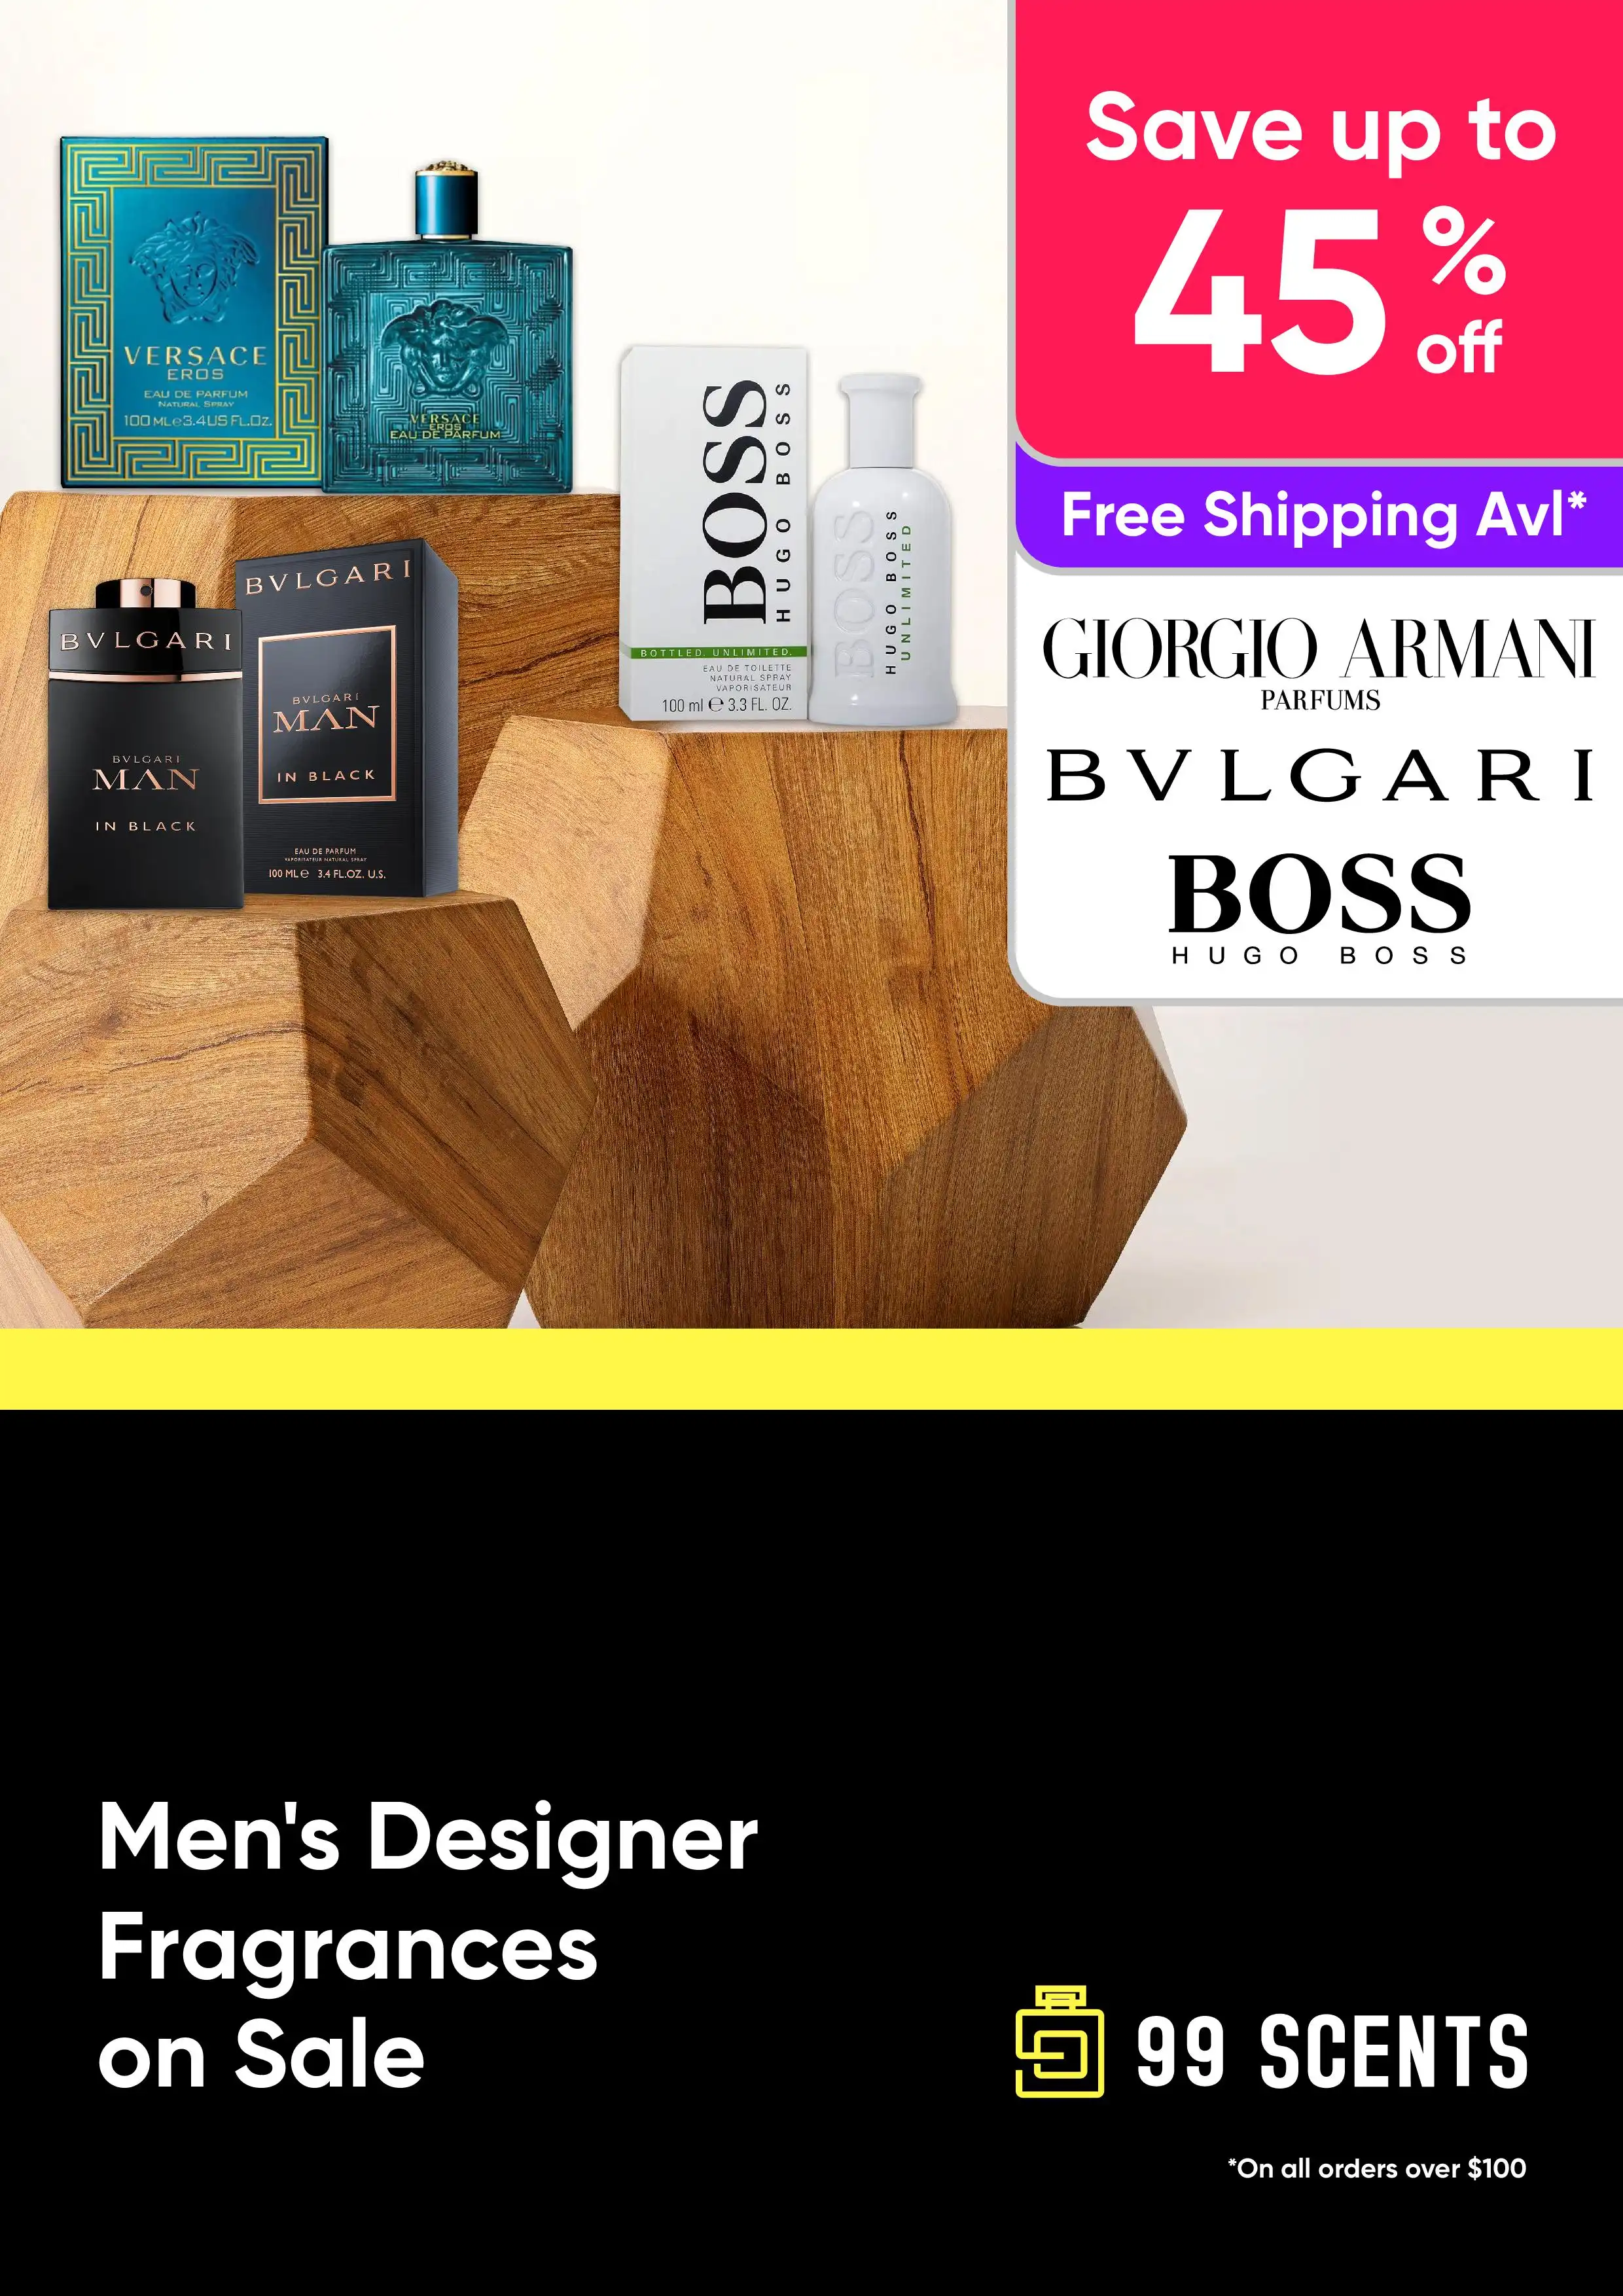 Men's Designer Perfumes on Sale up to 45% Off RRPs